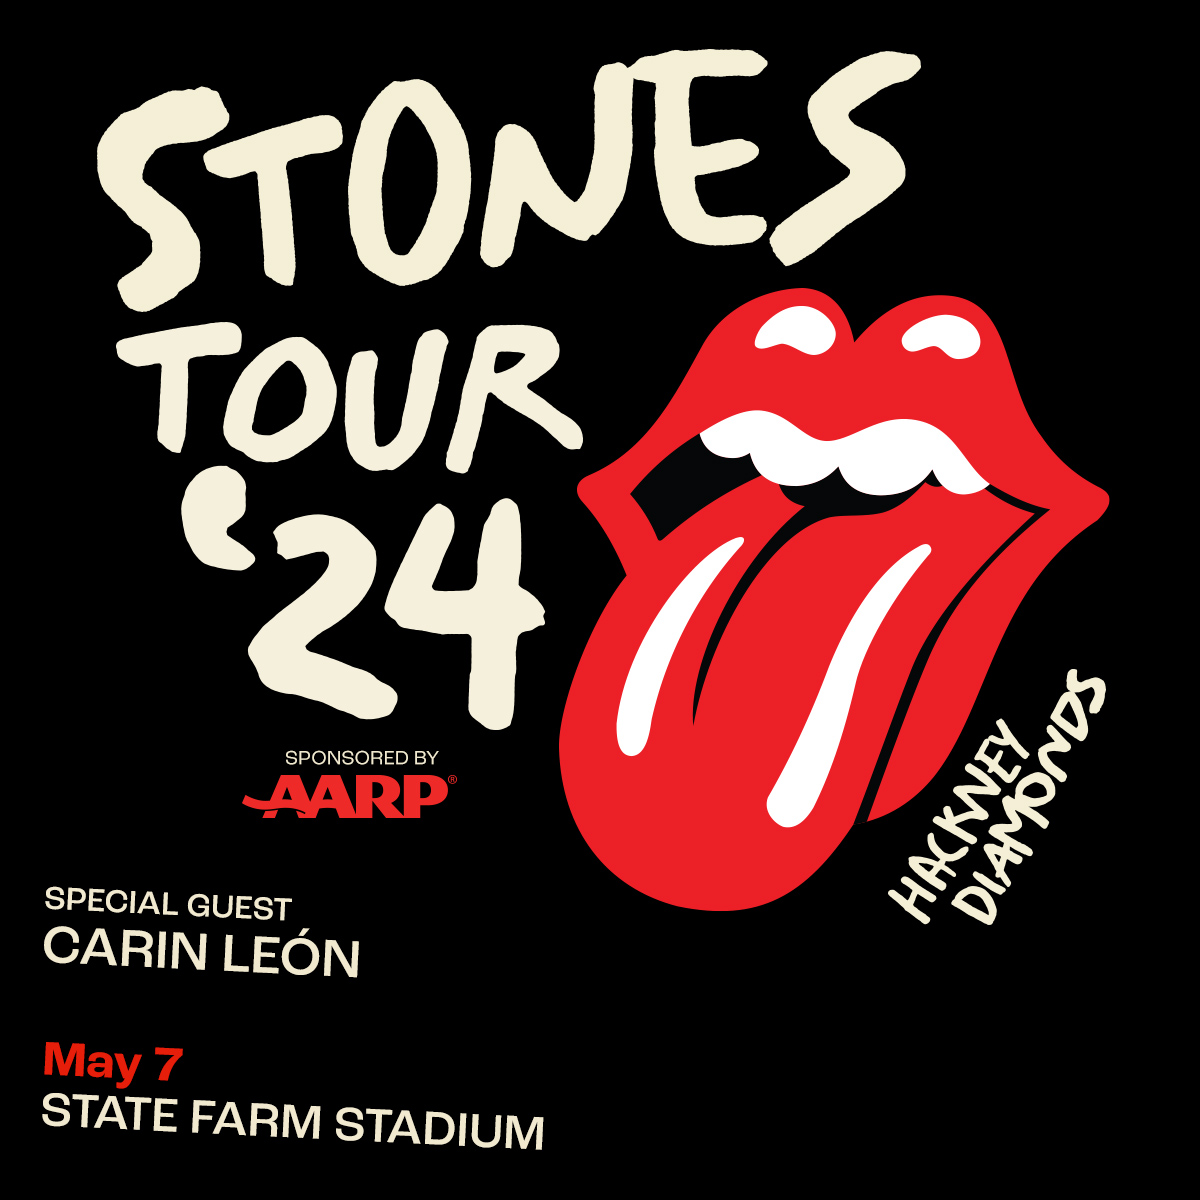 We're excited to announce Carin León will be opening for the Rolling Stones show on May 7. Please give him a warm welcome!